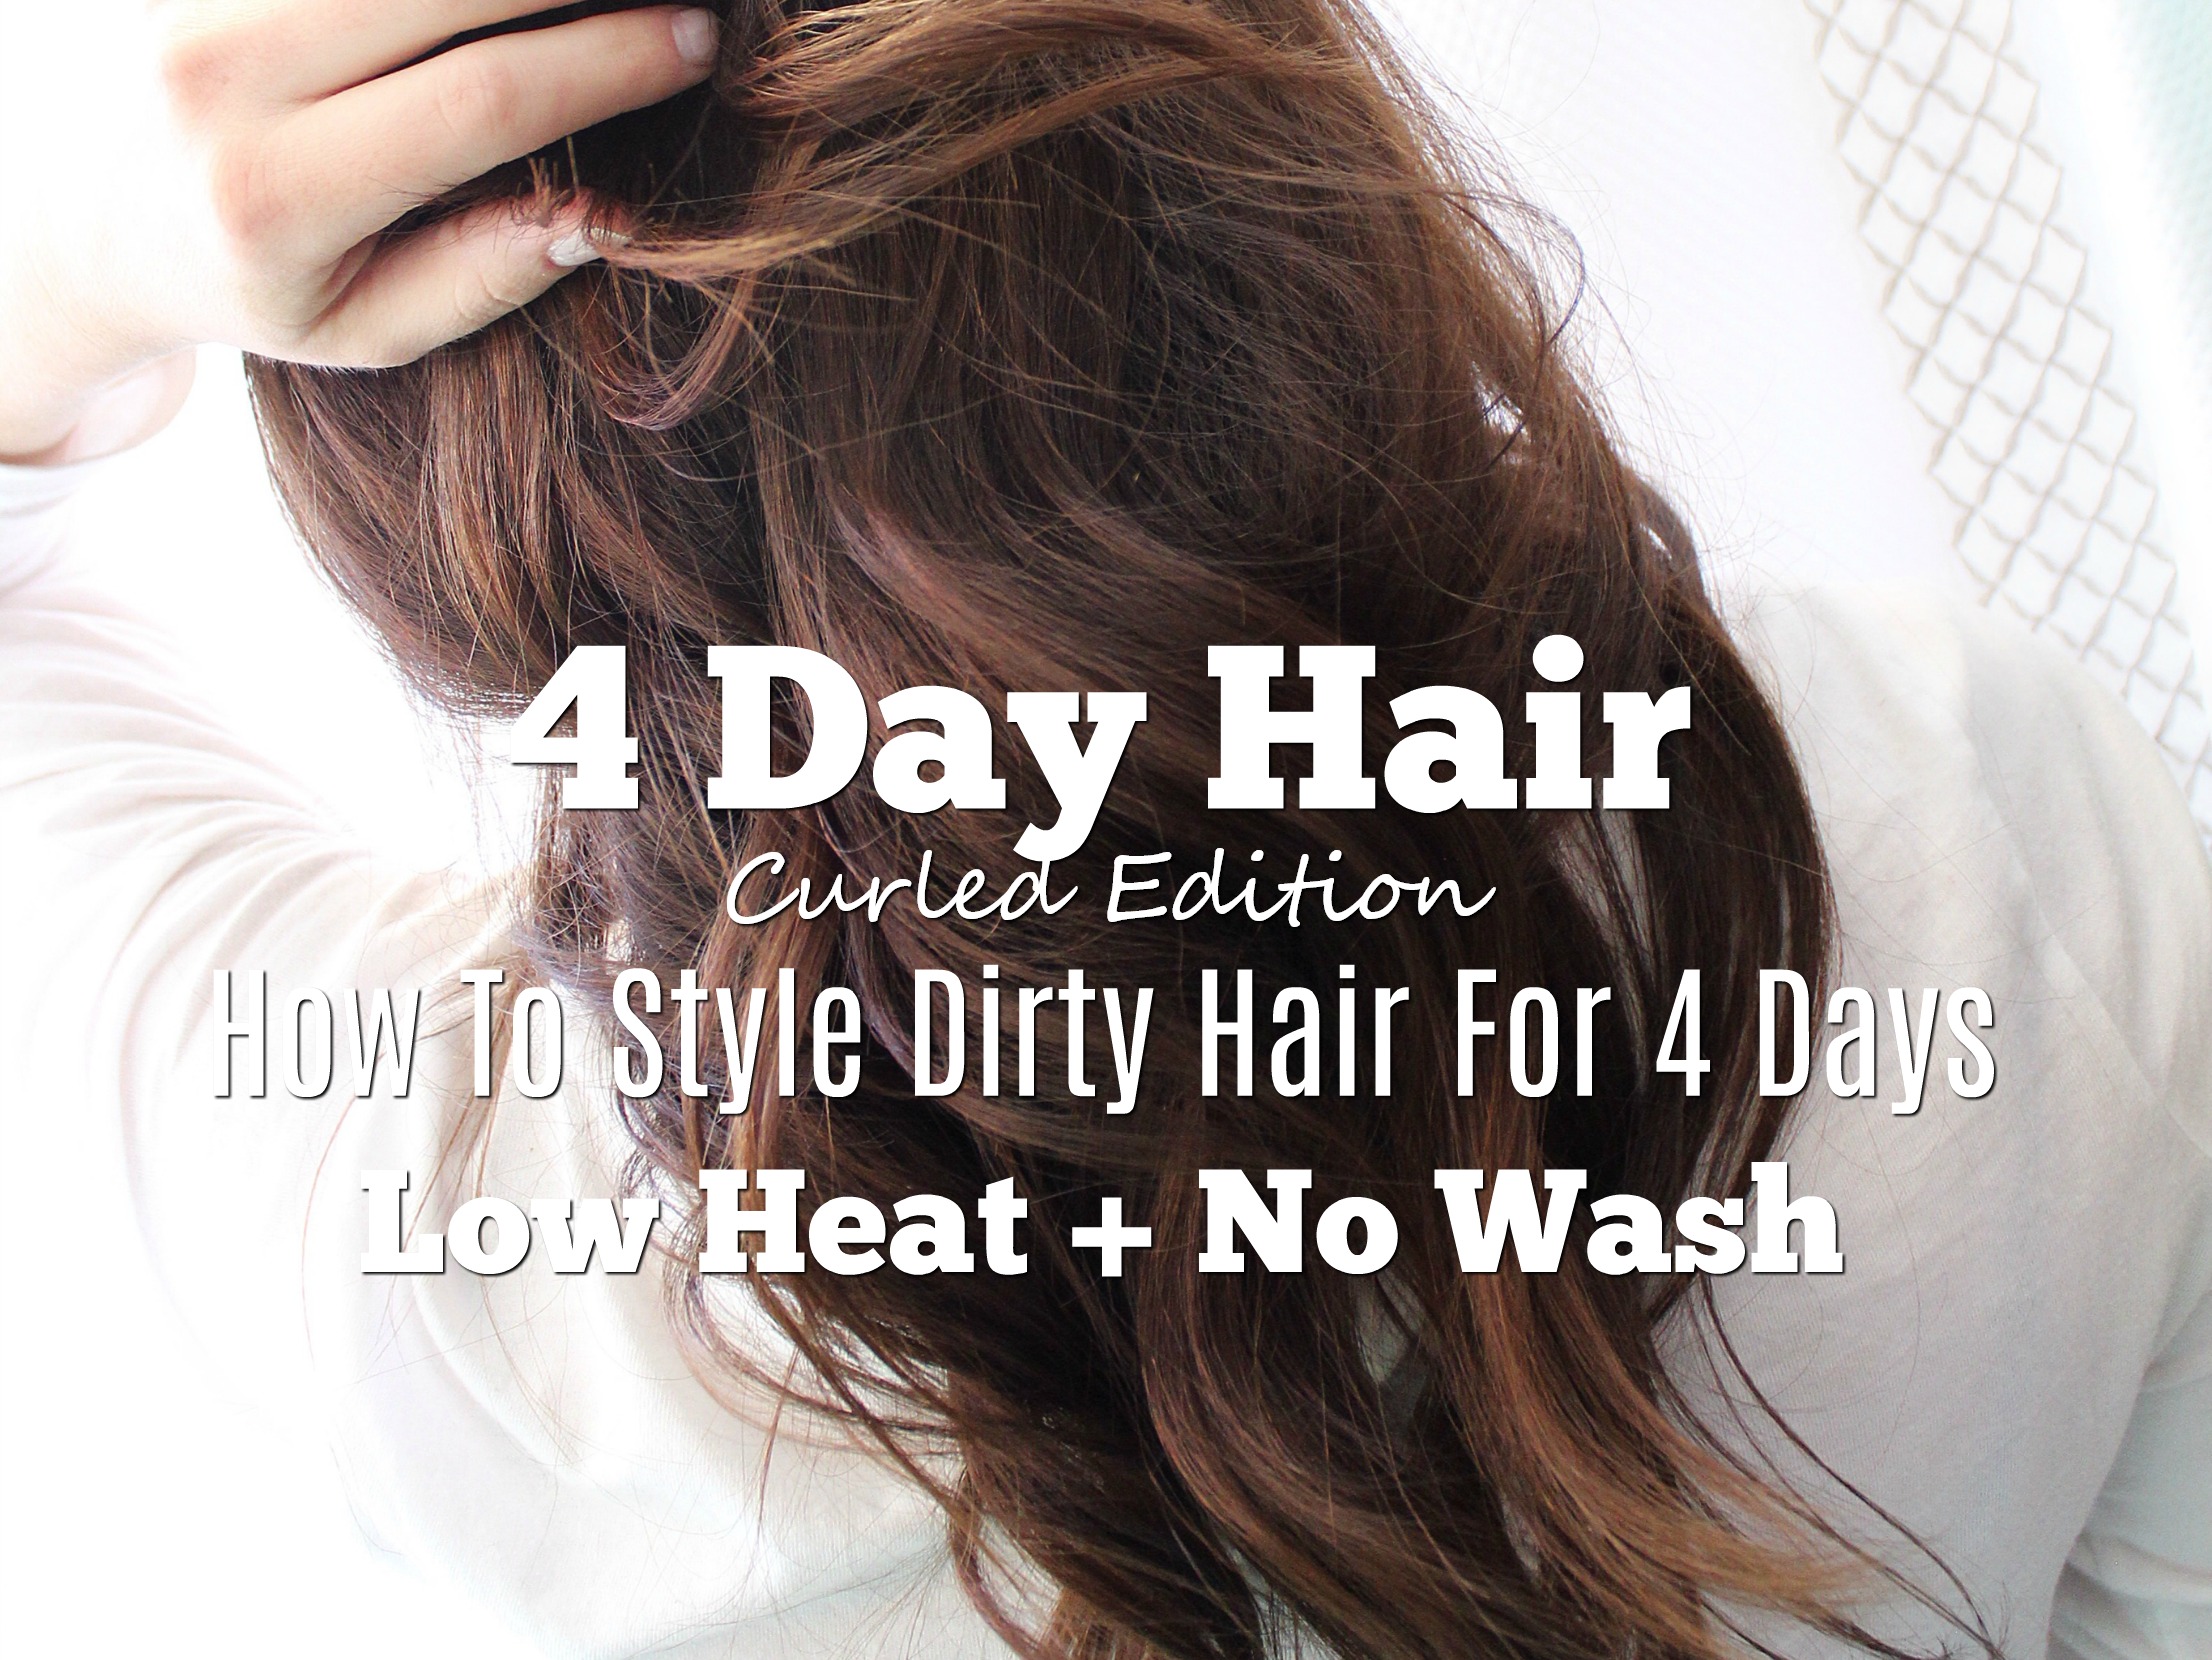 4 day hair curled edition how to style dirty hair .jpg